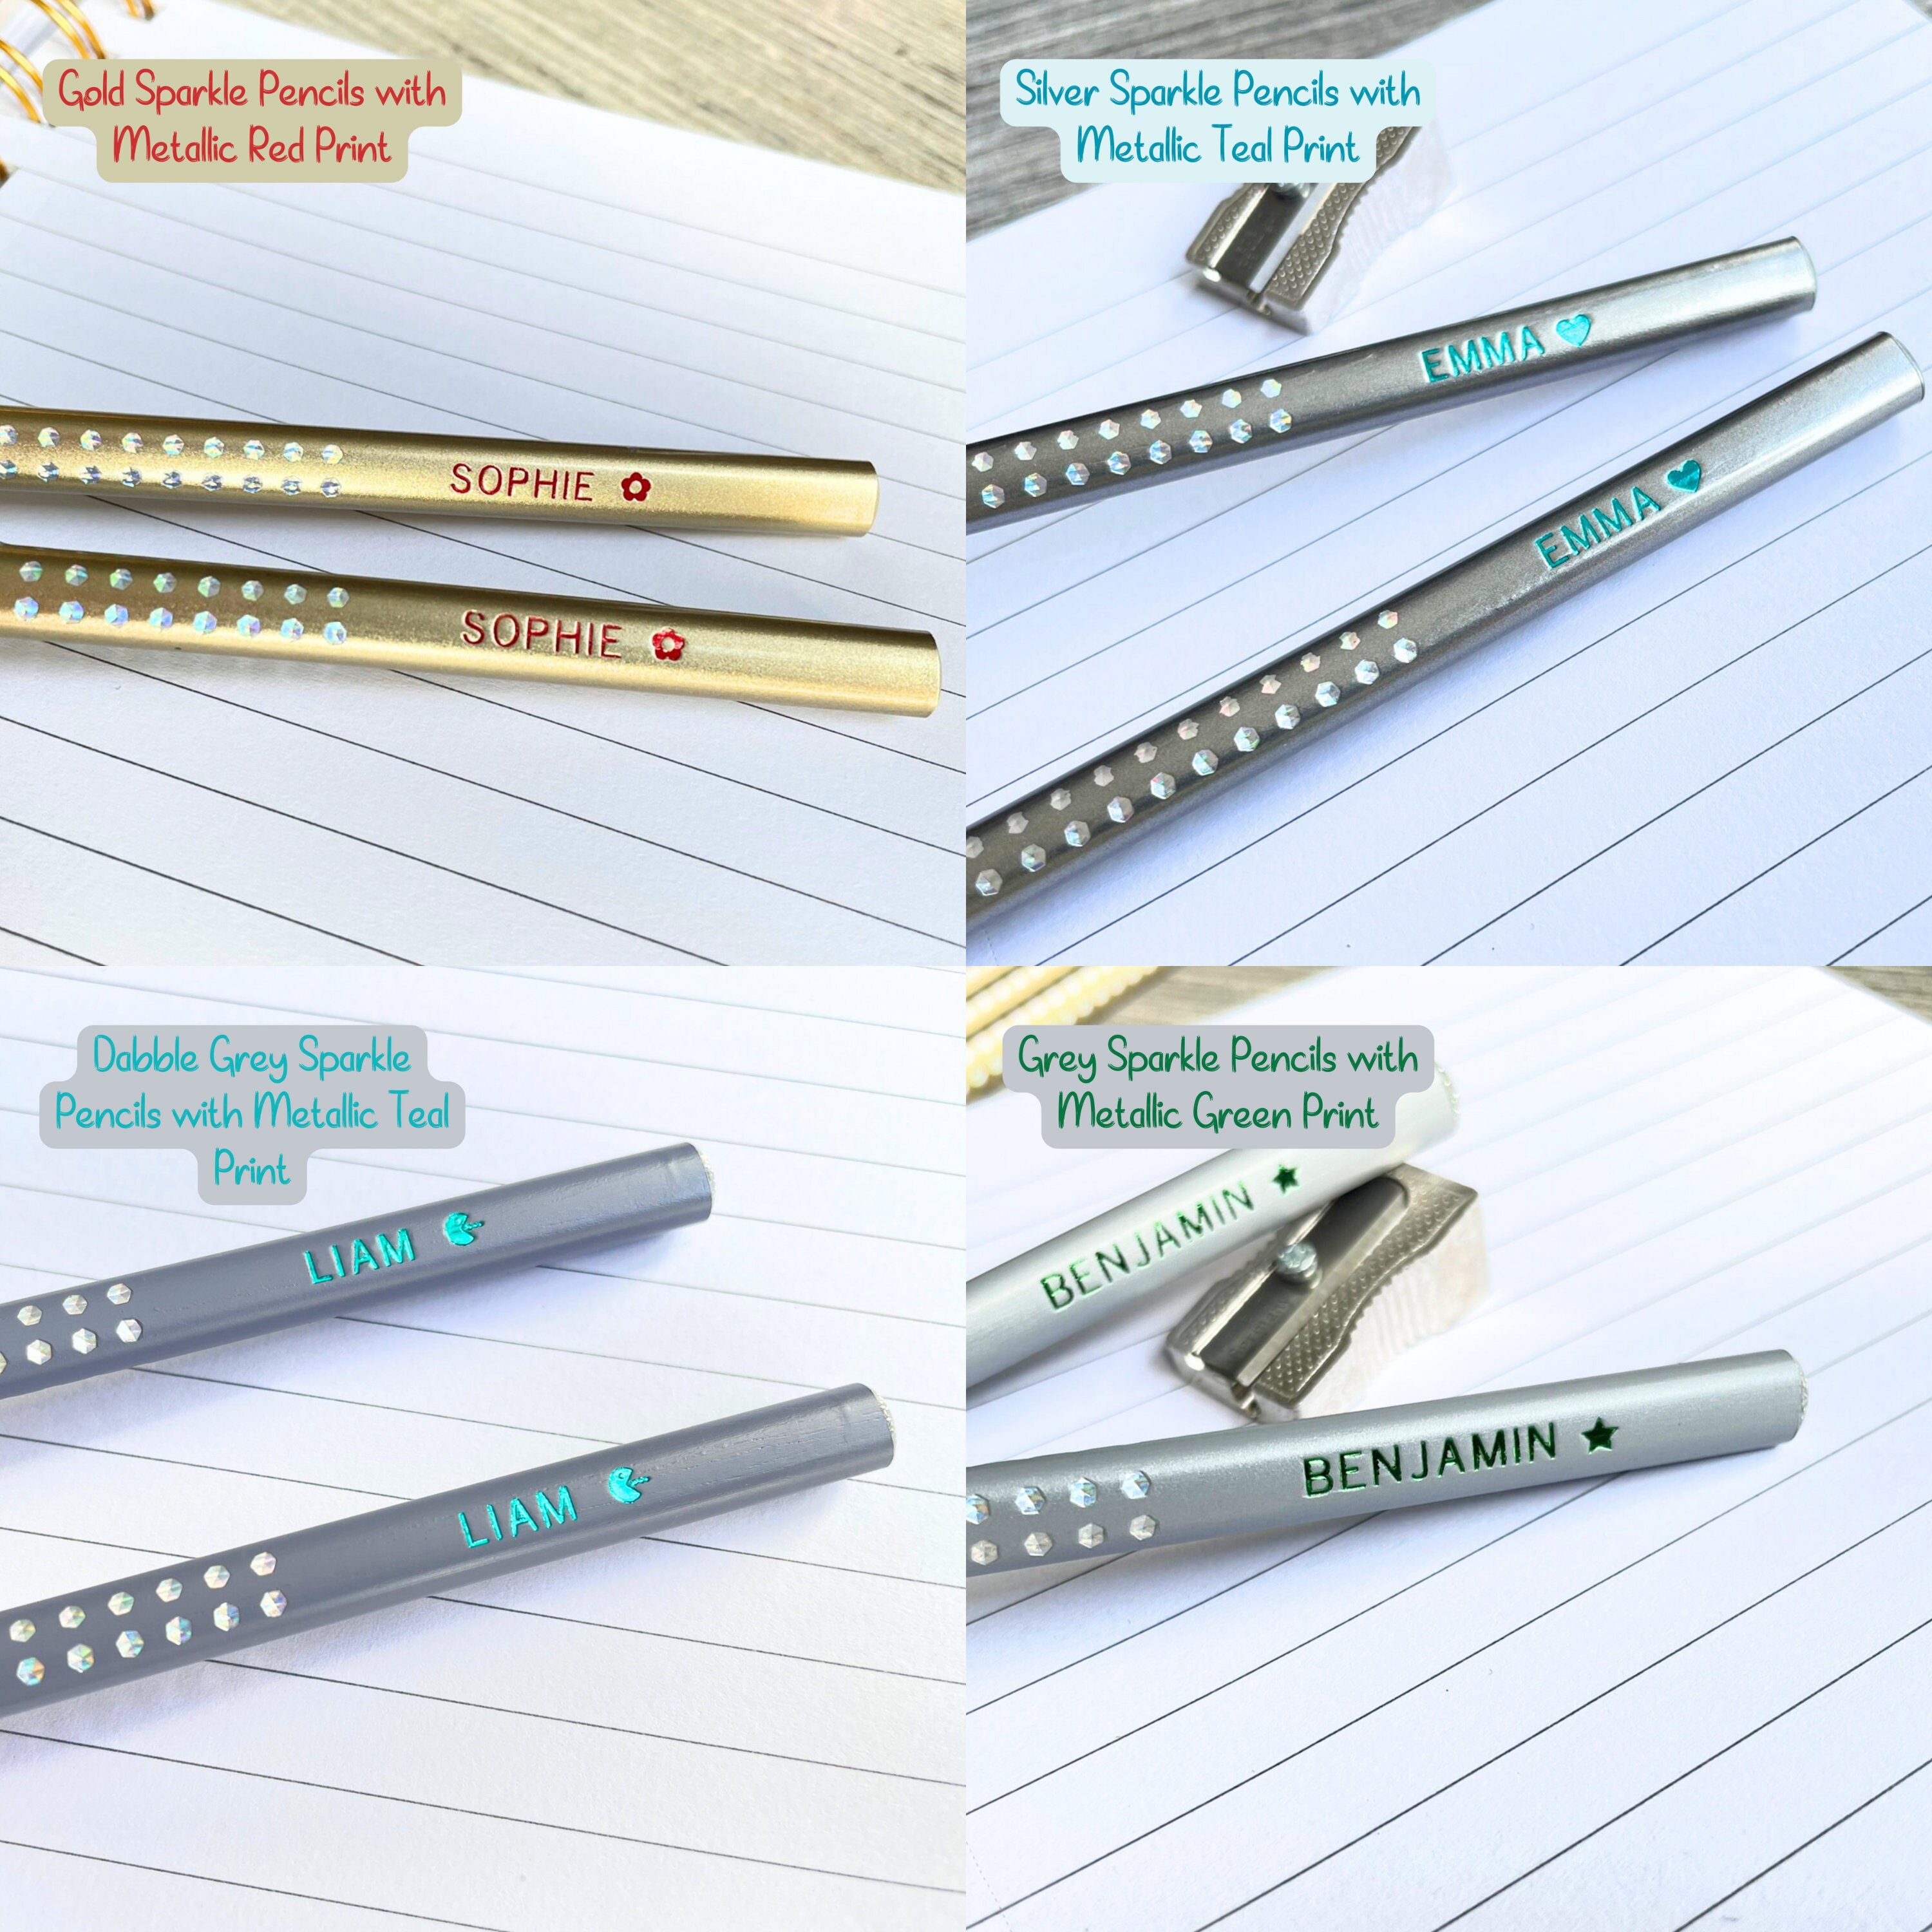 Custom Colored Pencils Faber-castell Sparkle Coloring Pencils for